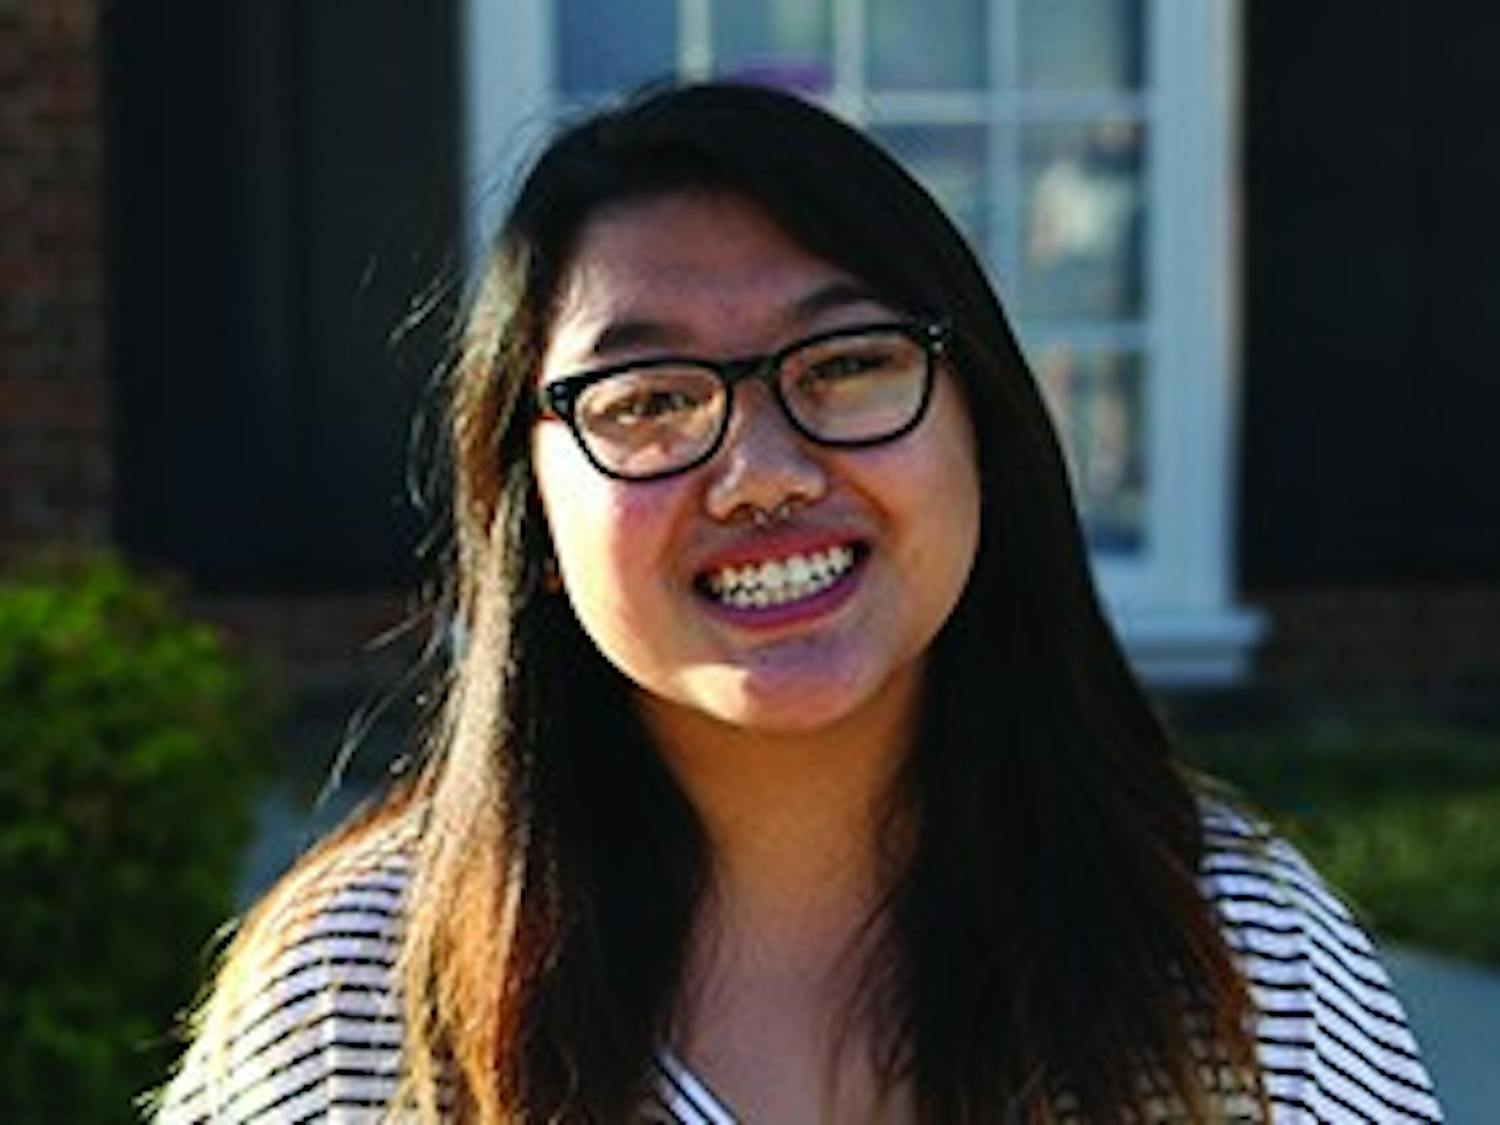 Assistant opinion editor Emily Yue